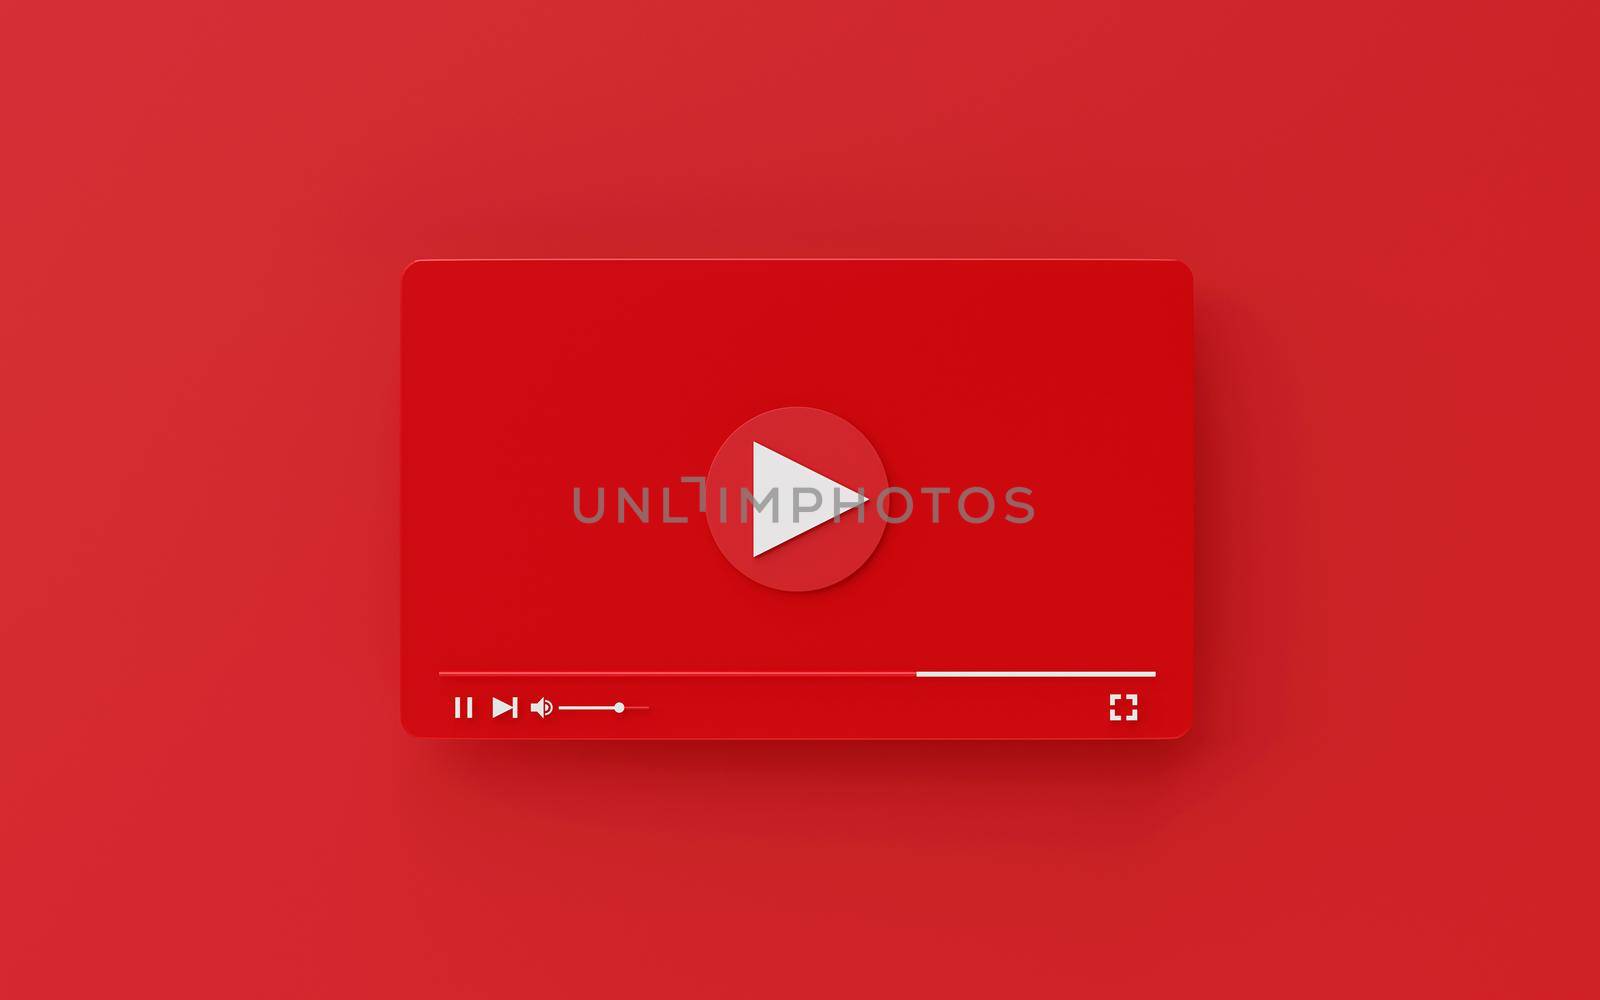 Minimal red media player on red background, 3d rendering